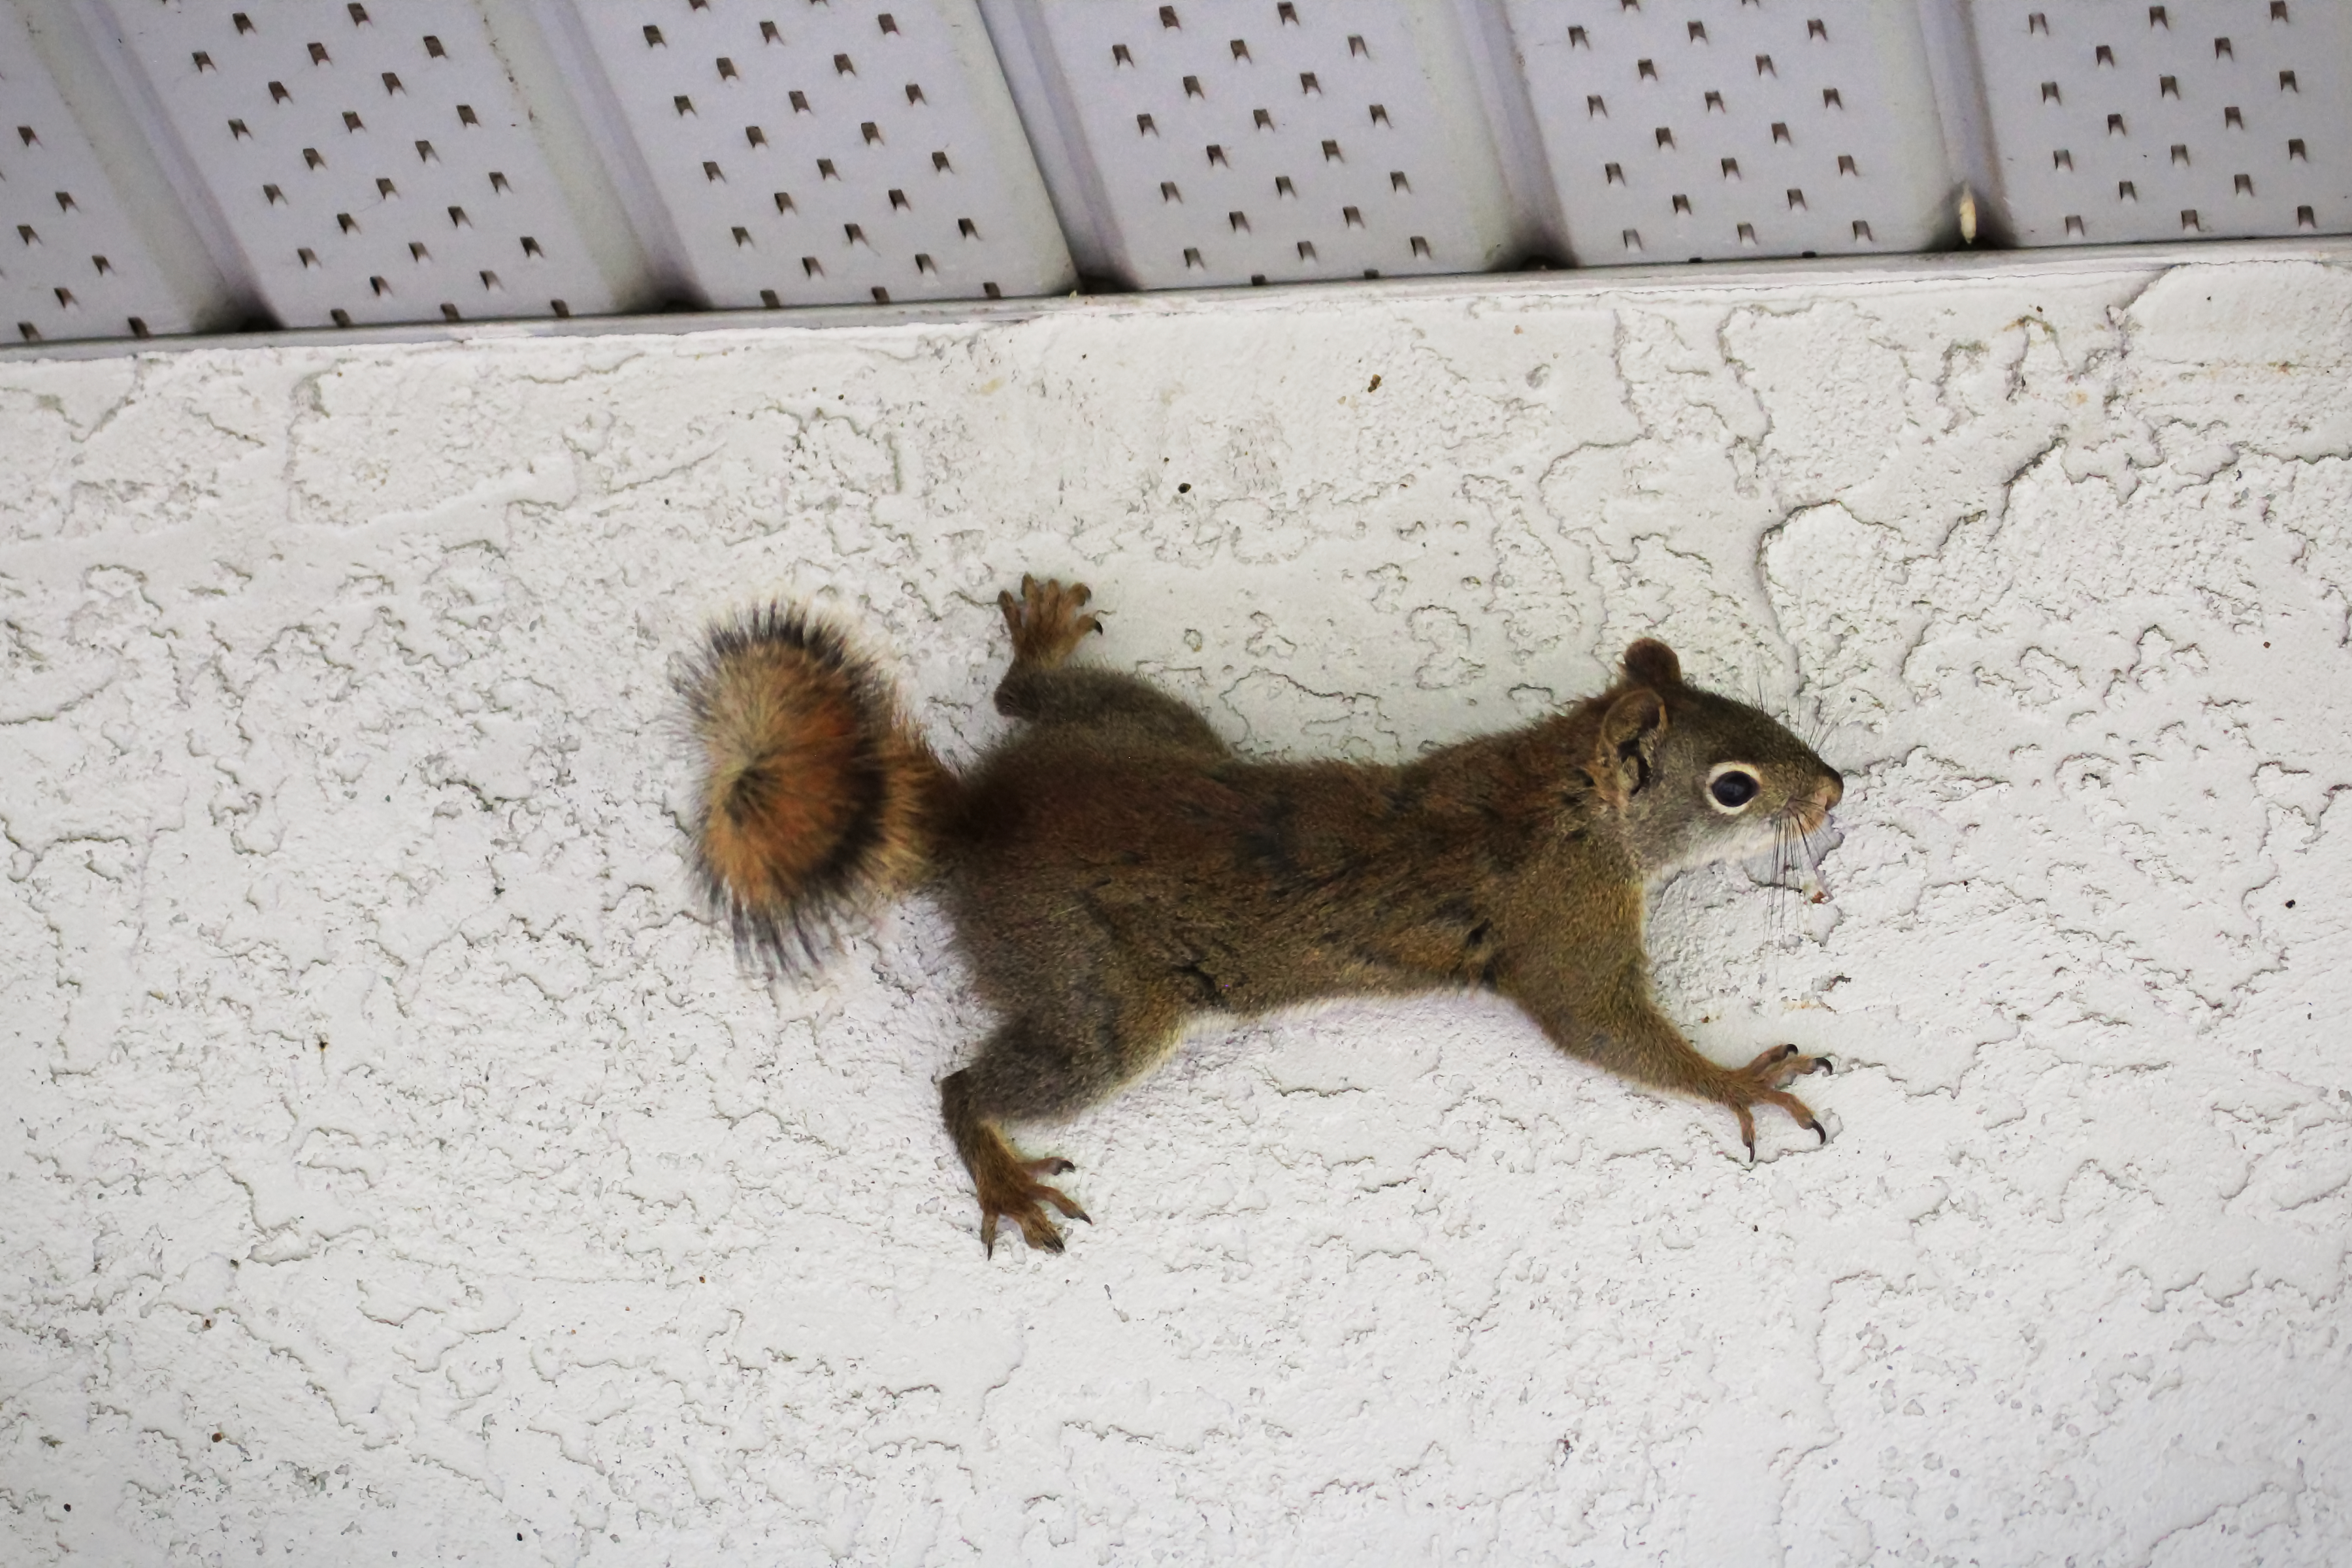 How Can I Prevent Squirrels from Entering My Home? Elite Wildlife Services in Houston, TX